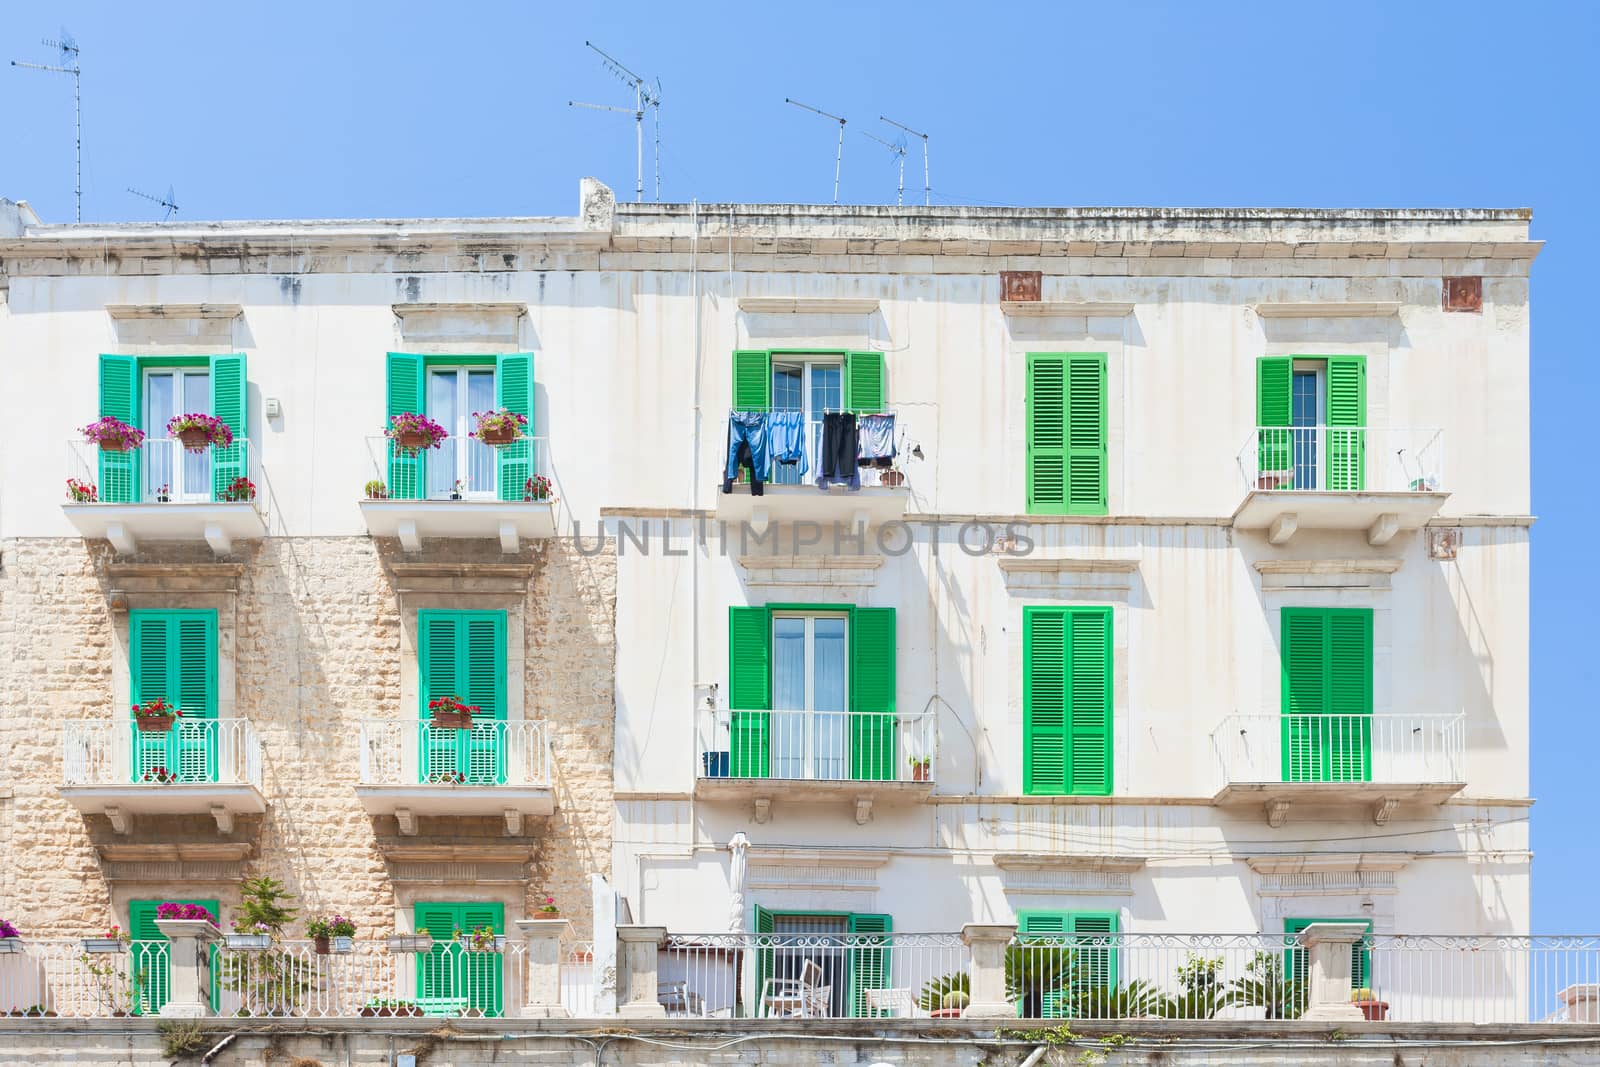 Molfetta, Apulia - Green window shutters at the historical facad by tagstiles.com